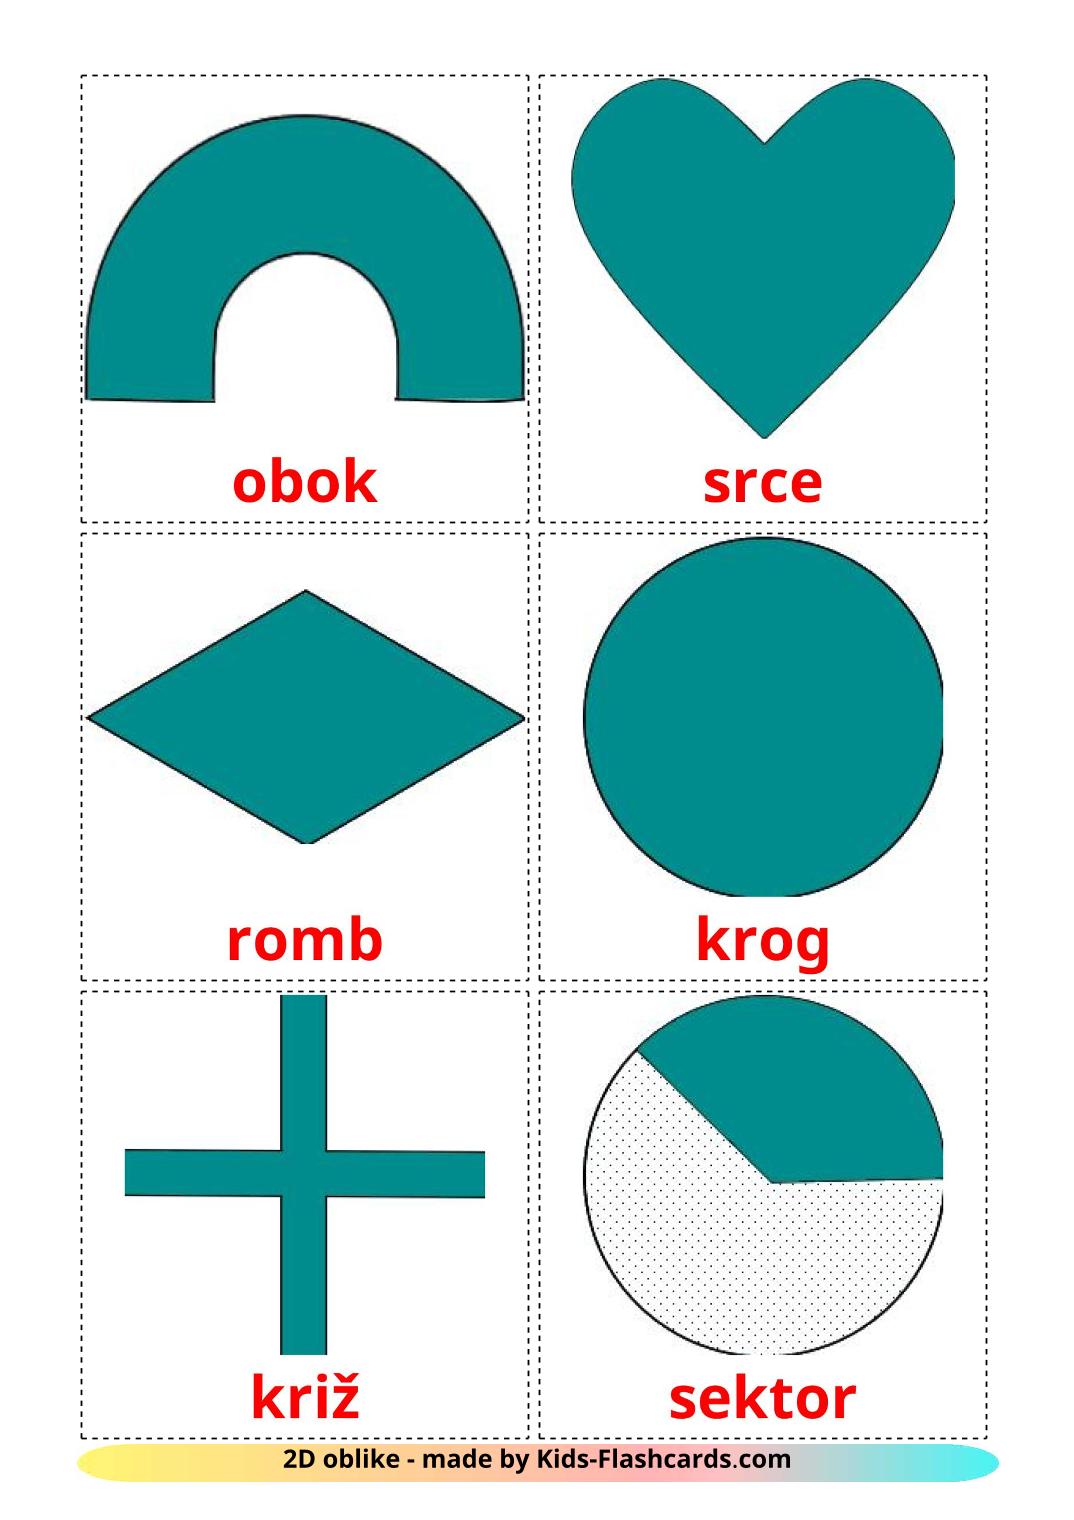 2D Shapes - 35 Free Printable slovenian Flashcards 